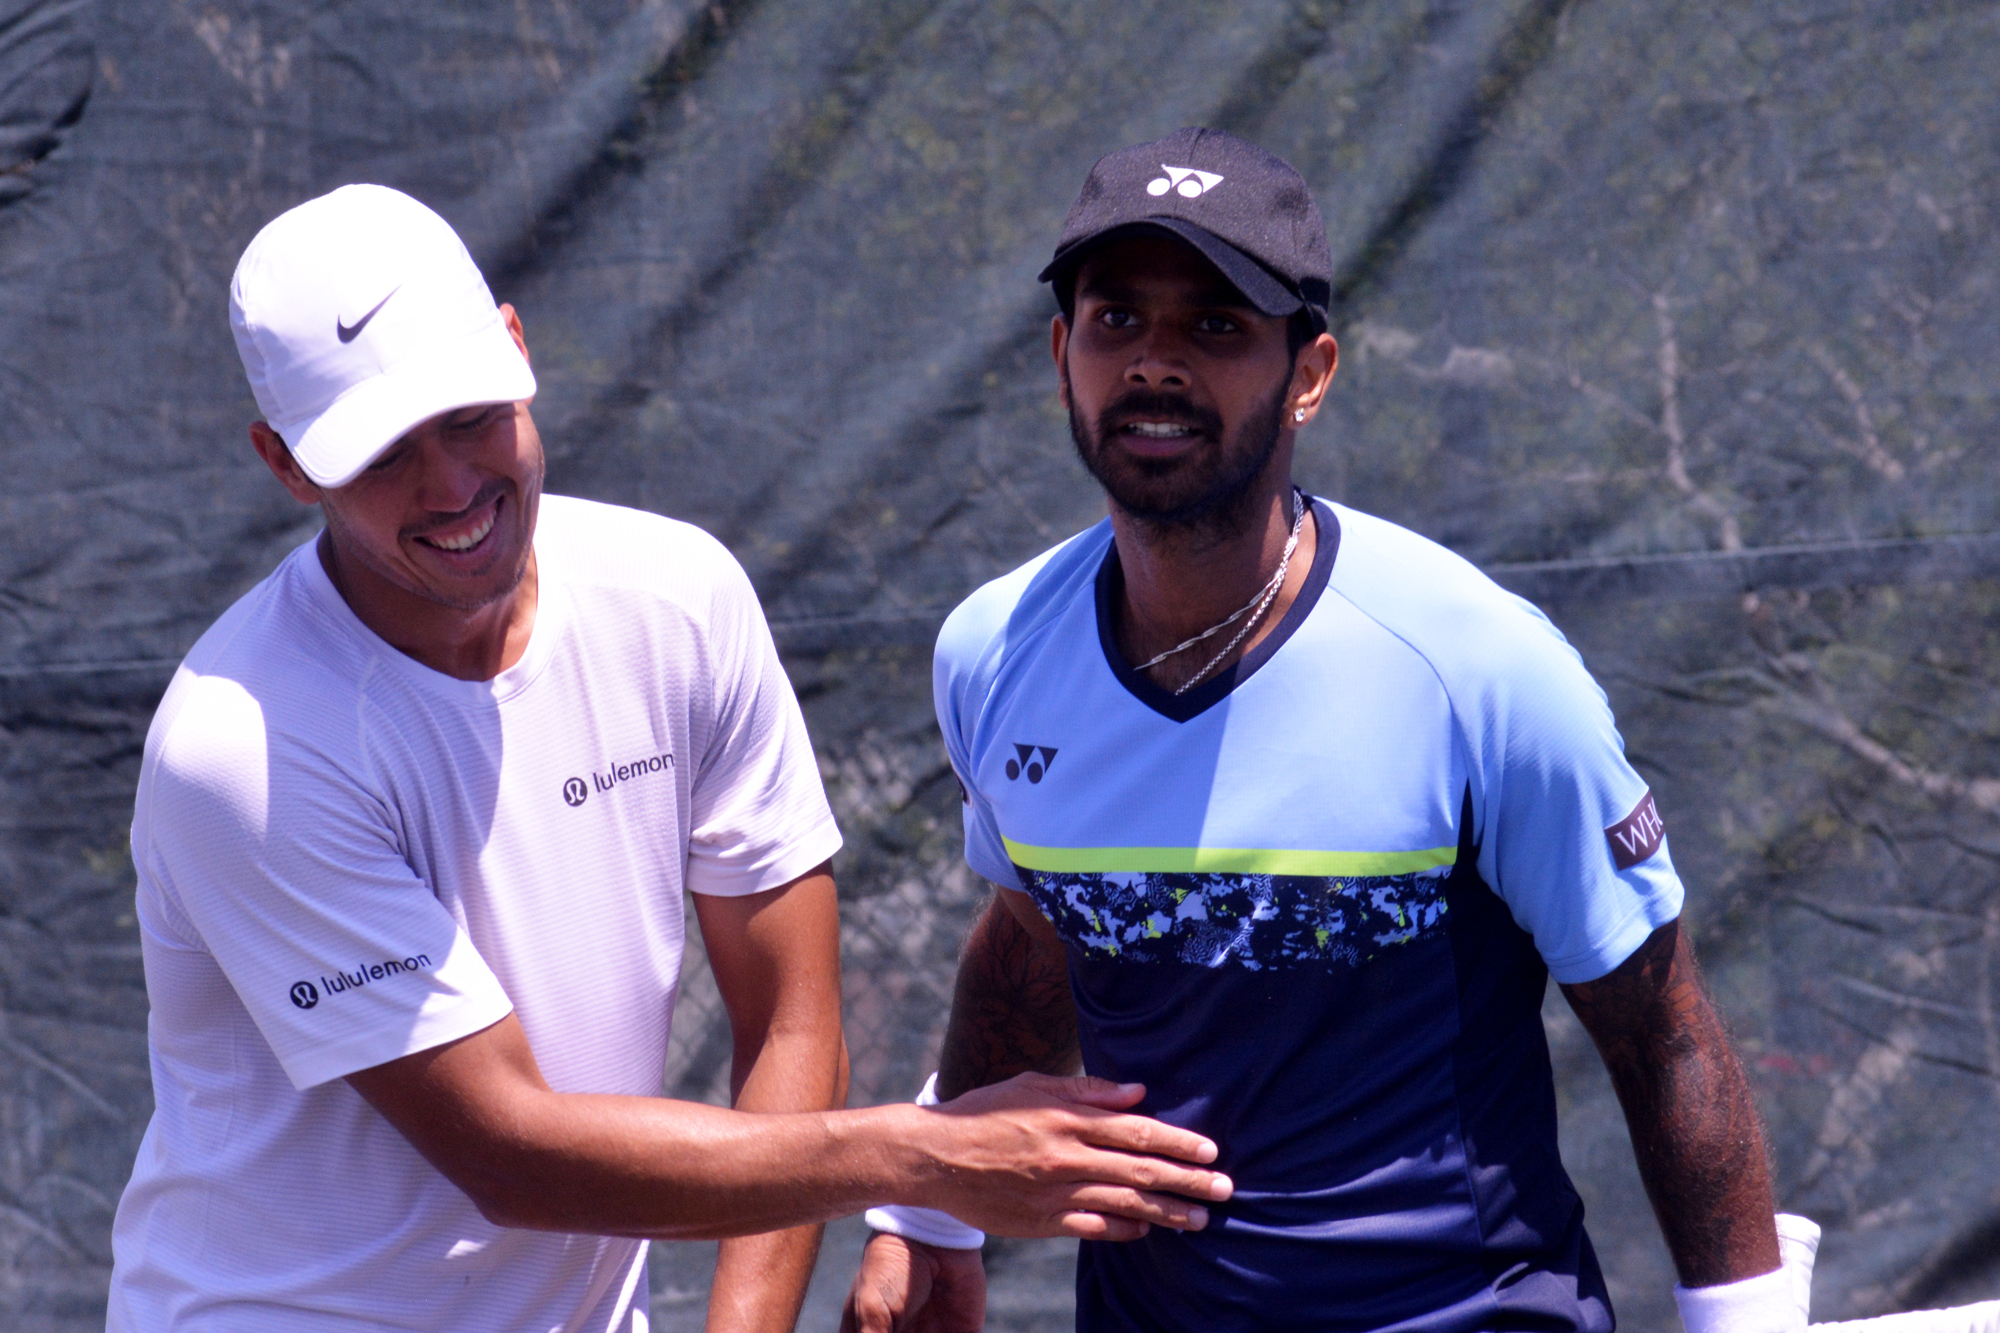 Jason Kubler and Sumit Nagal share a moment after their match at the Sarasota Open.